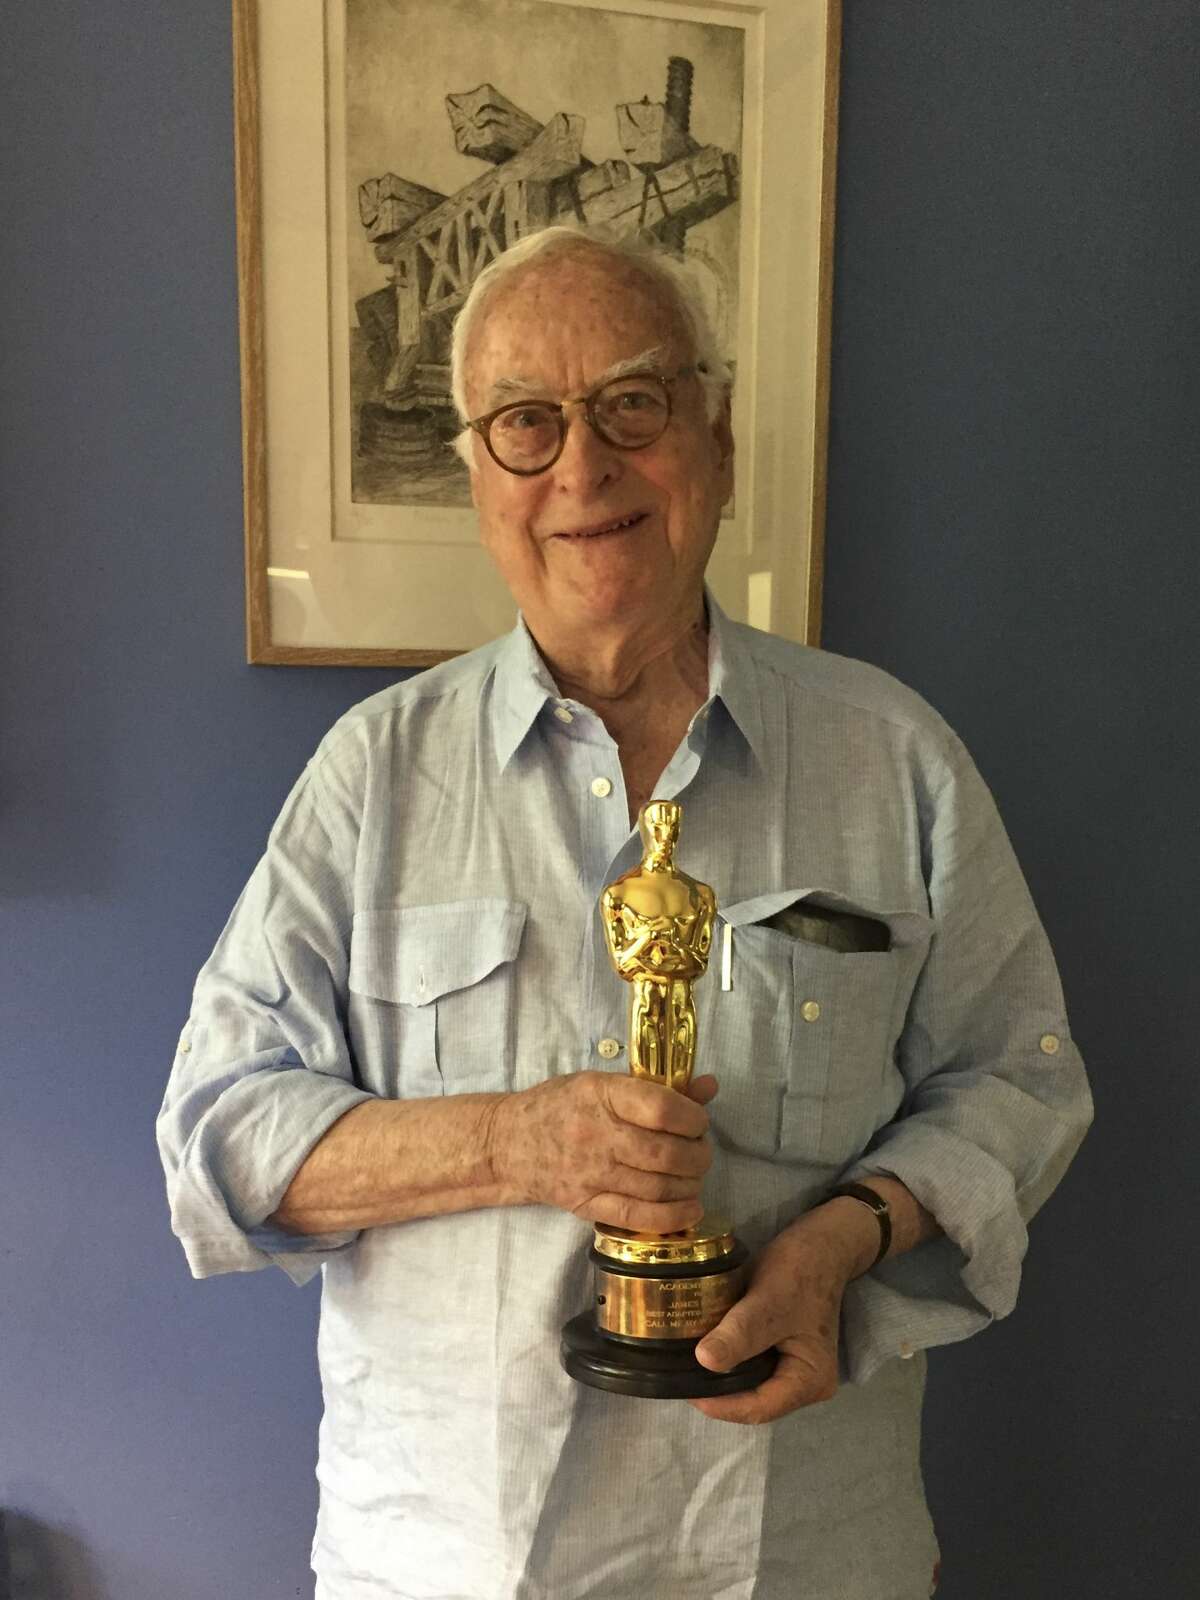 Merchant Ivory Director James Ivory holds his Oscar on the morning after his 90th birthday party on June 10th, 2018 in Claverack, NY. (Photo by Mikki Ansin/Getty Images)